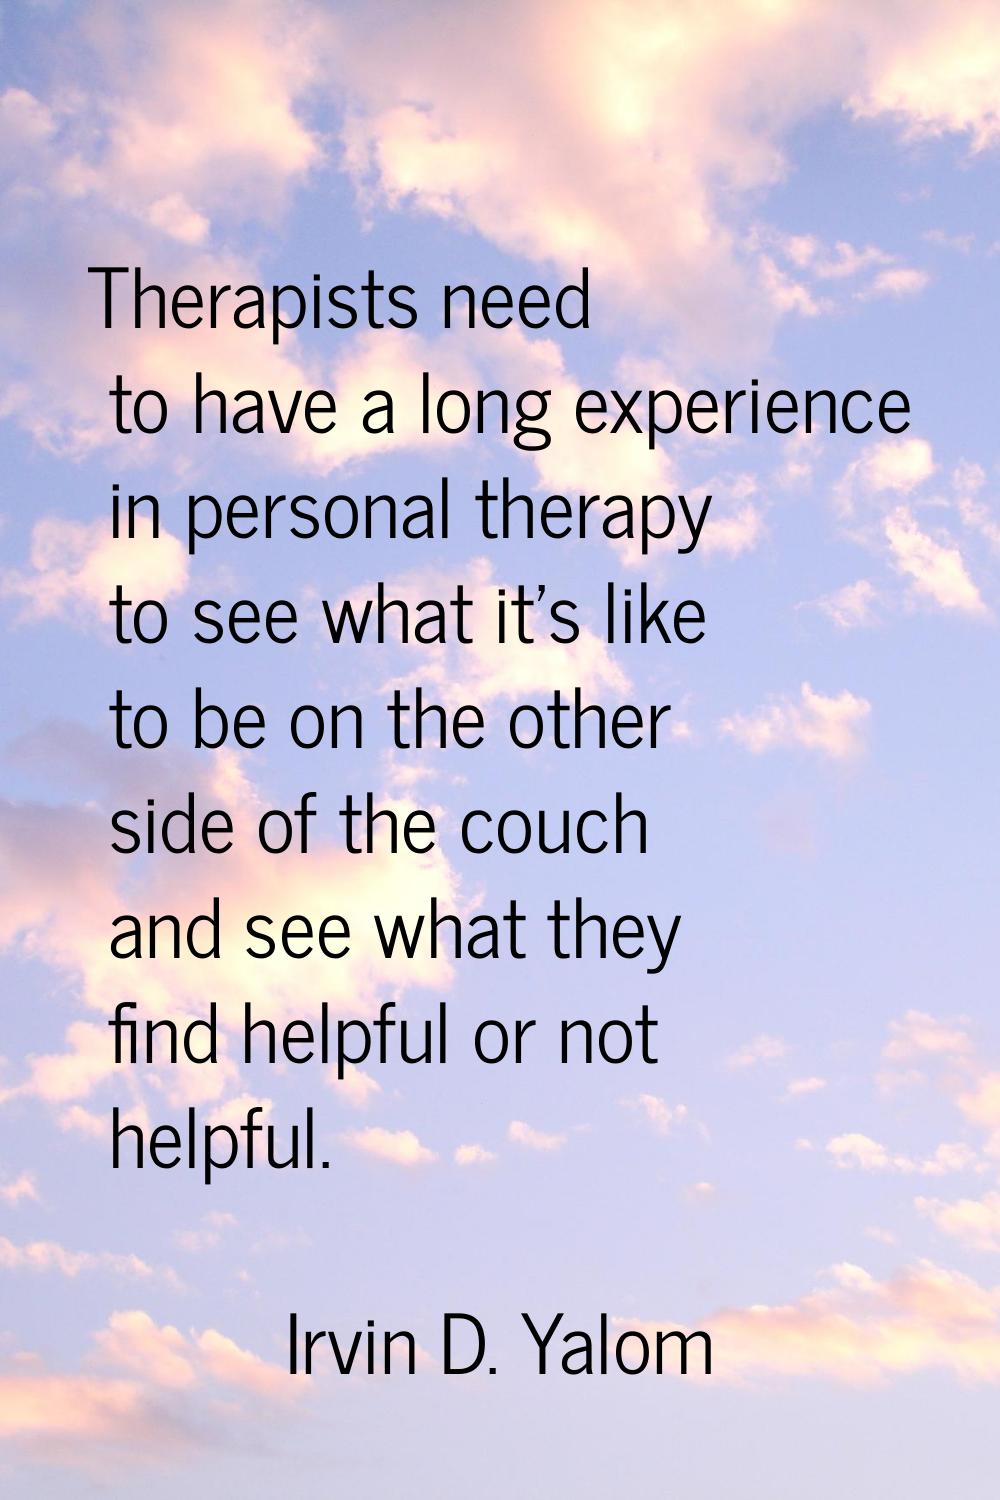 Therapists need to have a long experience in personal therapy to see what it's like to be on the ot